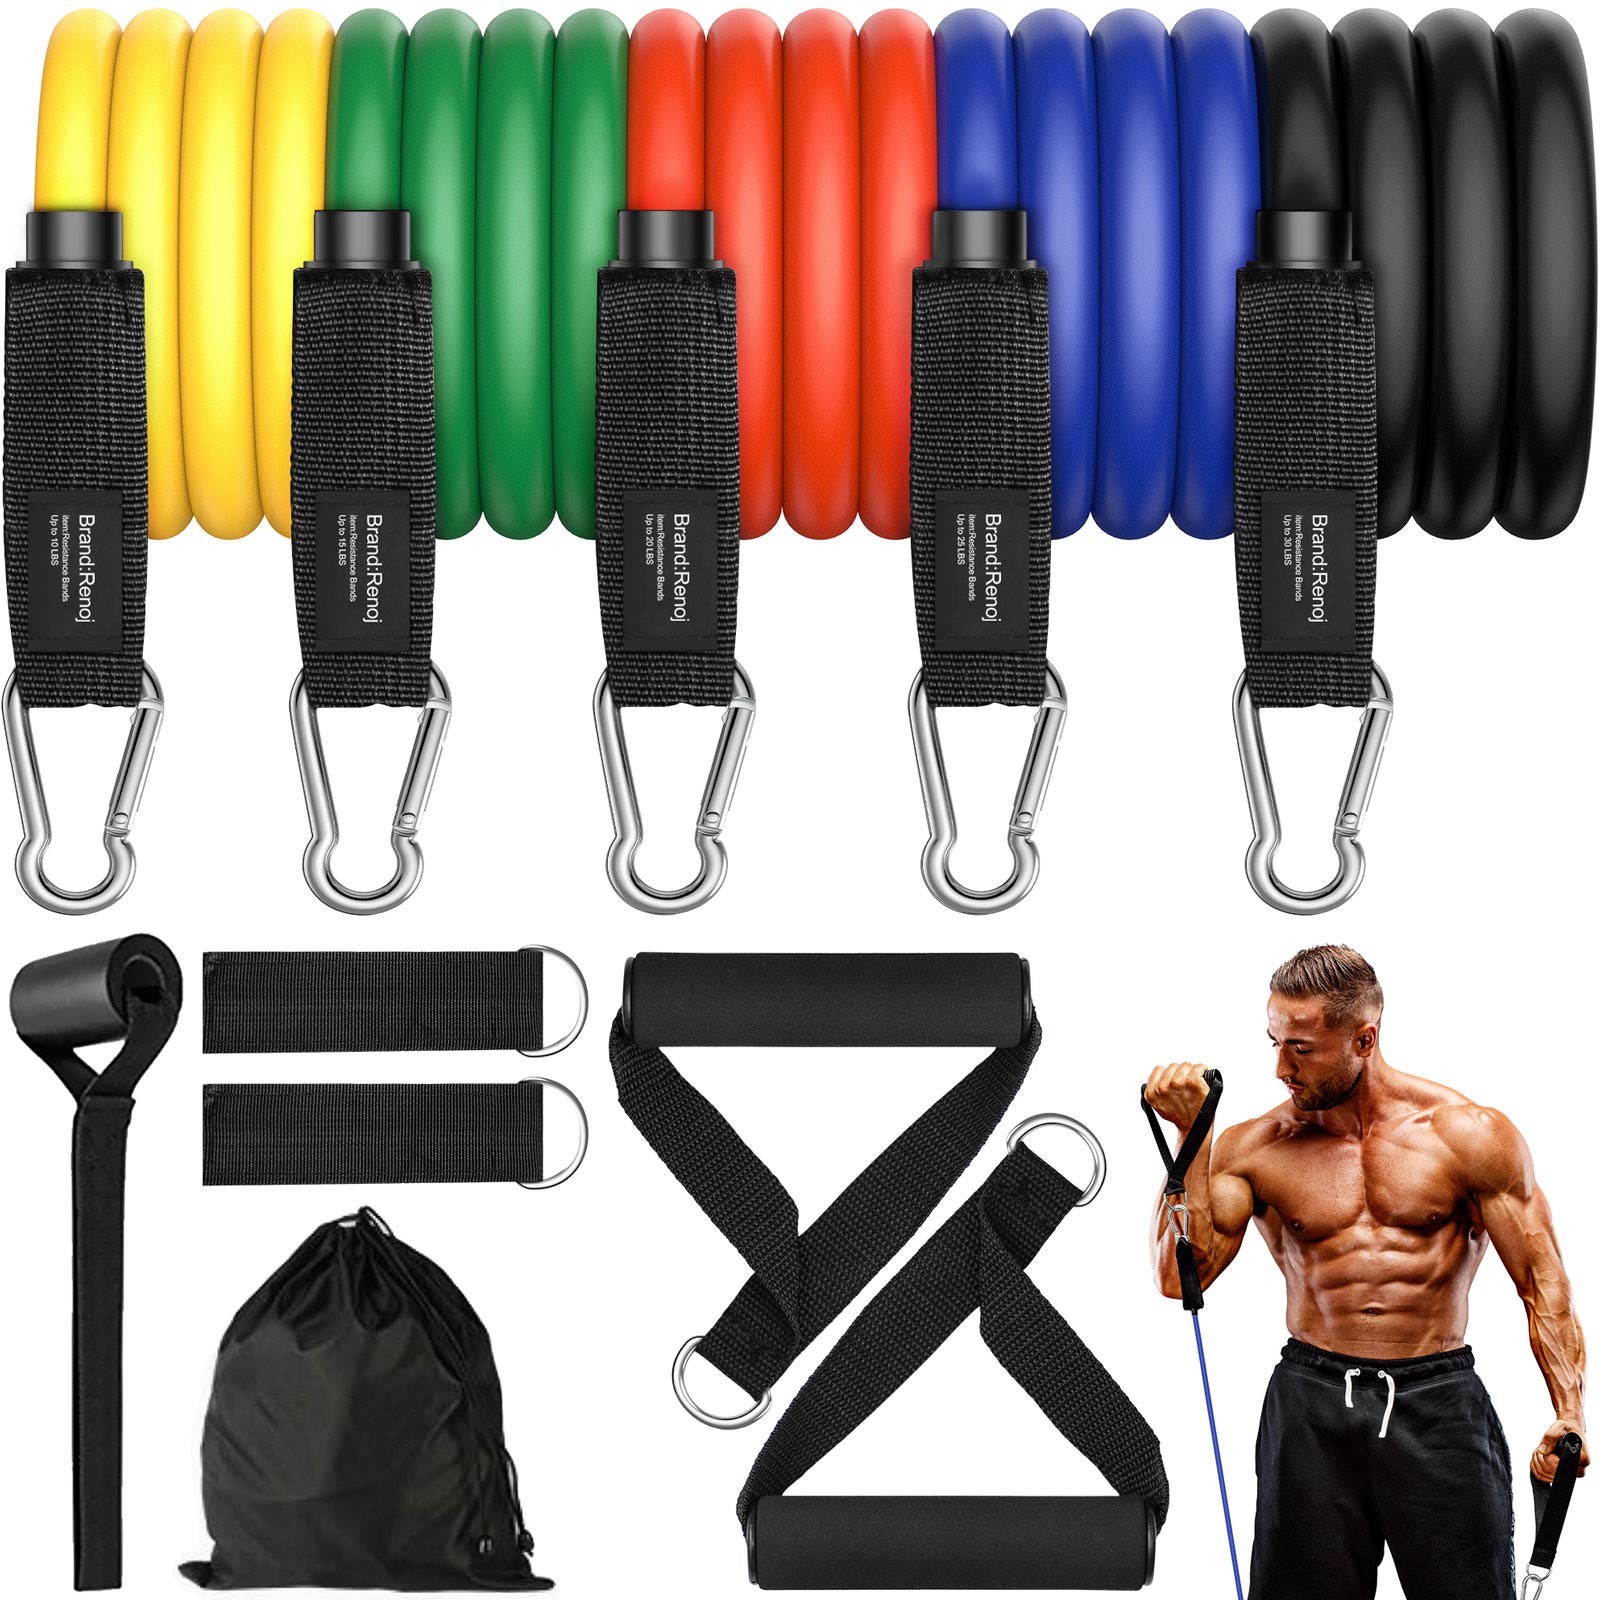 Exercise Bands Resistance Bands Set with Bigger Handles and Bag, Upgraded Workout Bands with More Resistance for Women and Men (Black red Yellow Green Blue)